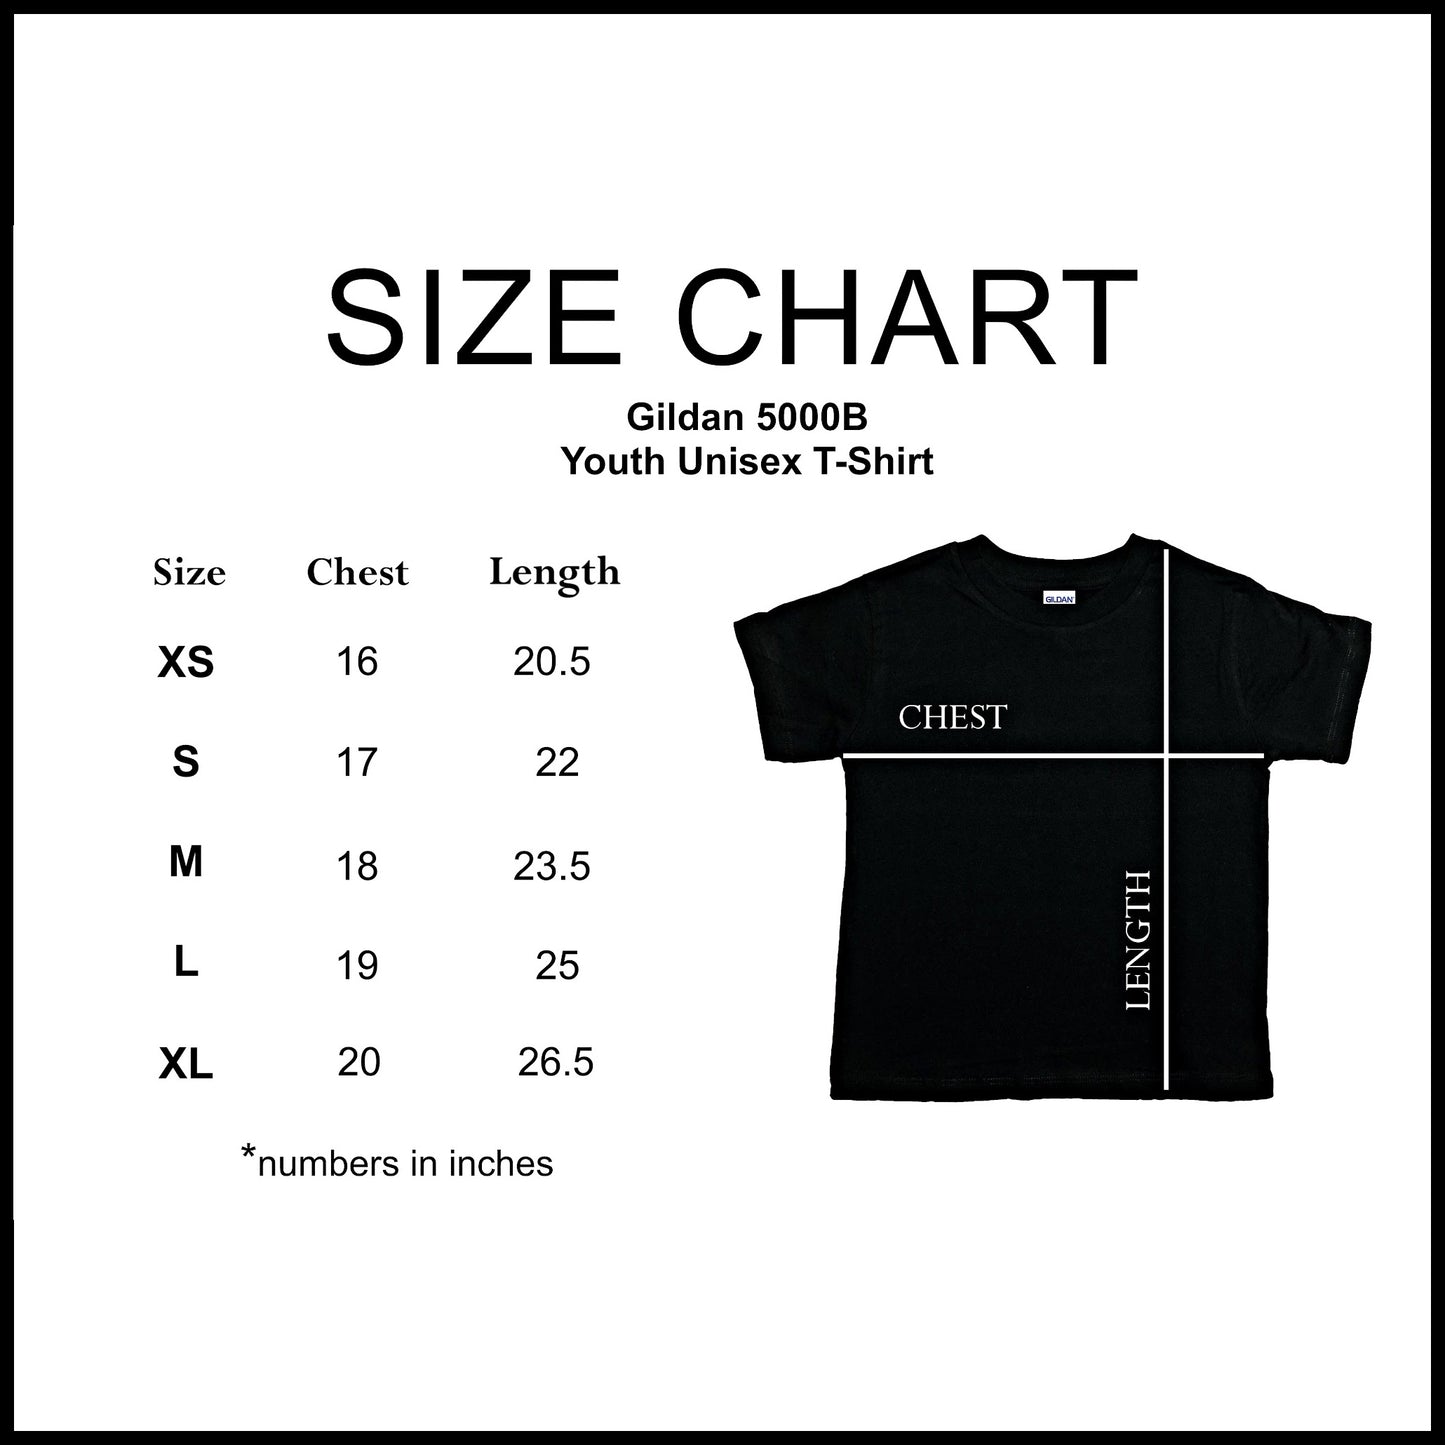 Size chart of this Gildan youth unisex t-shirt